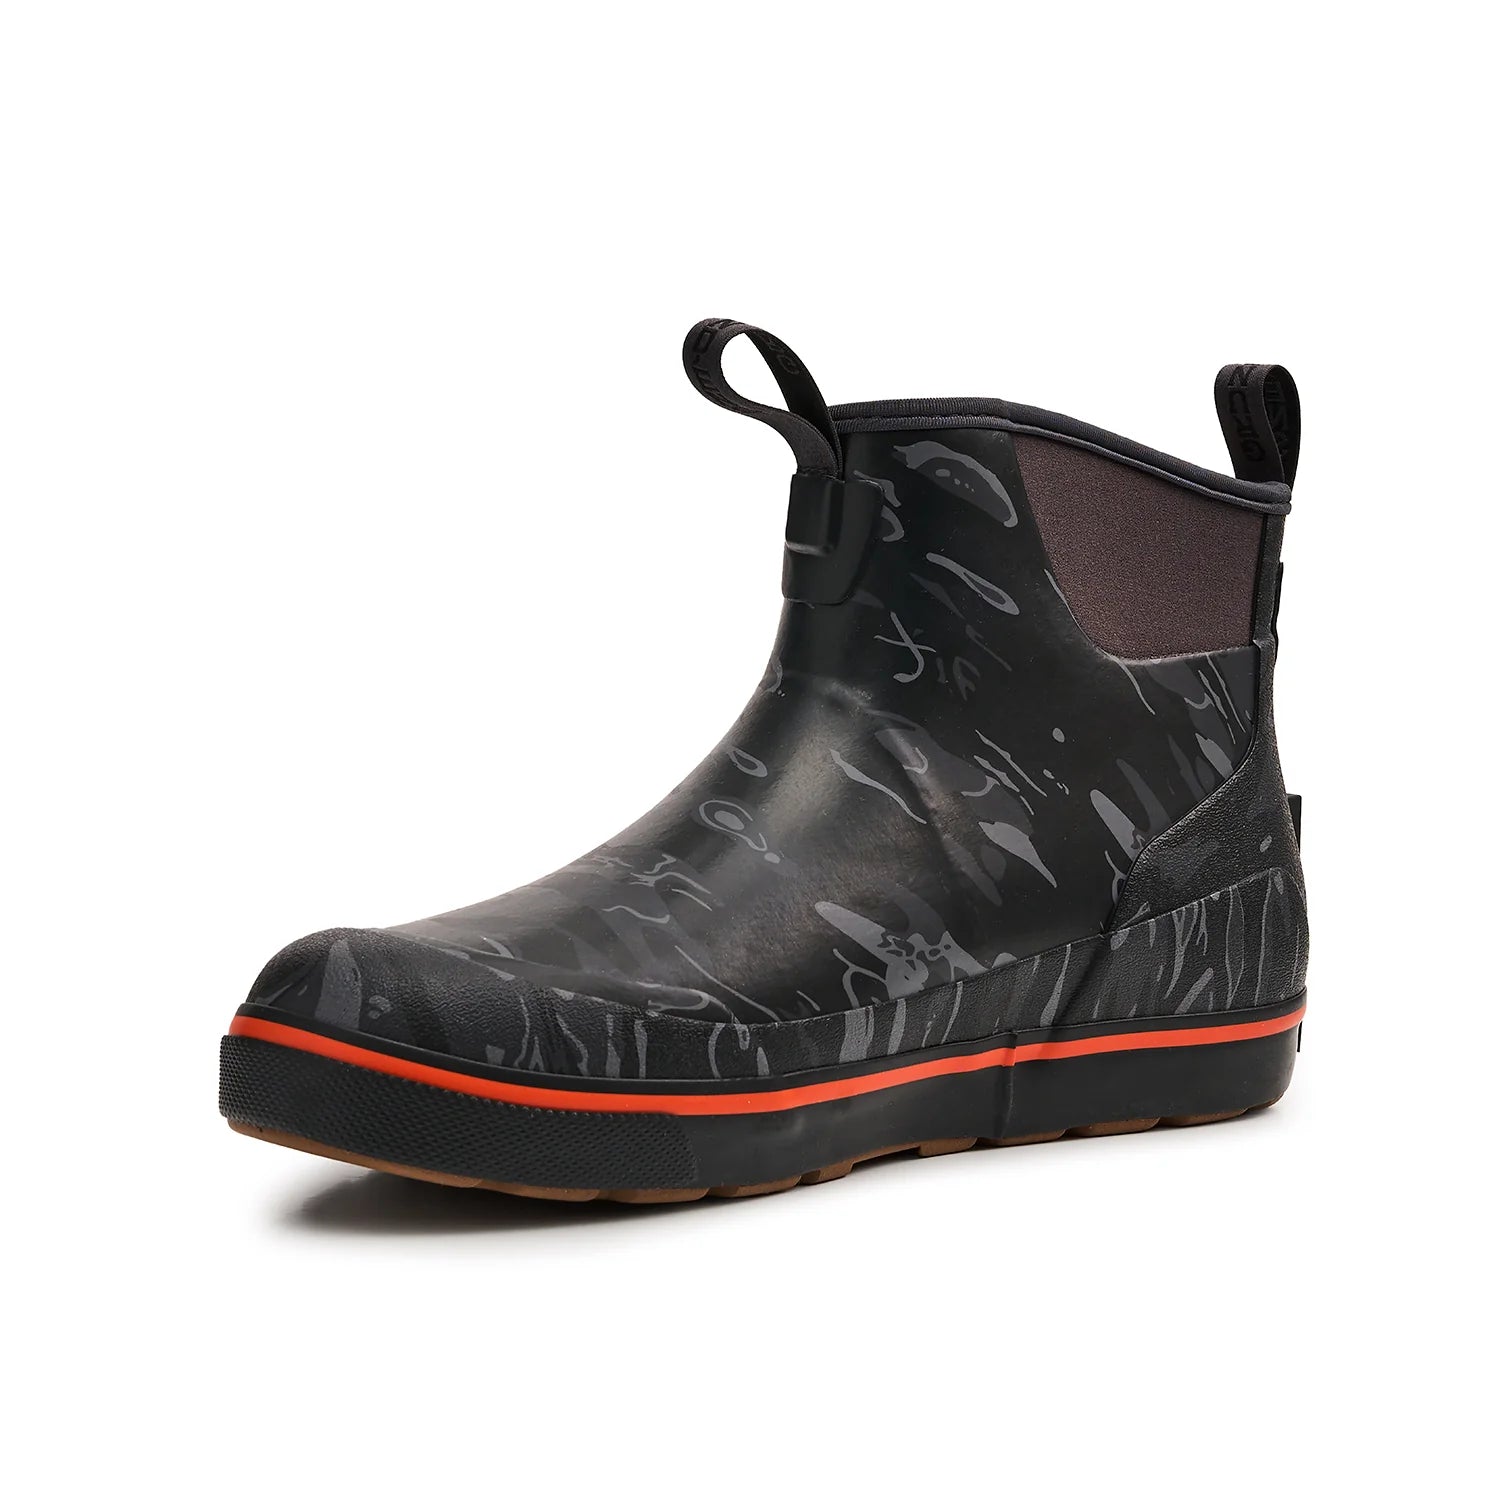 Grundens Deck-Boss Ankle Fishing Boots